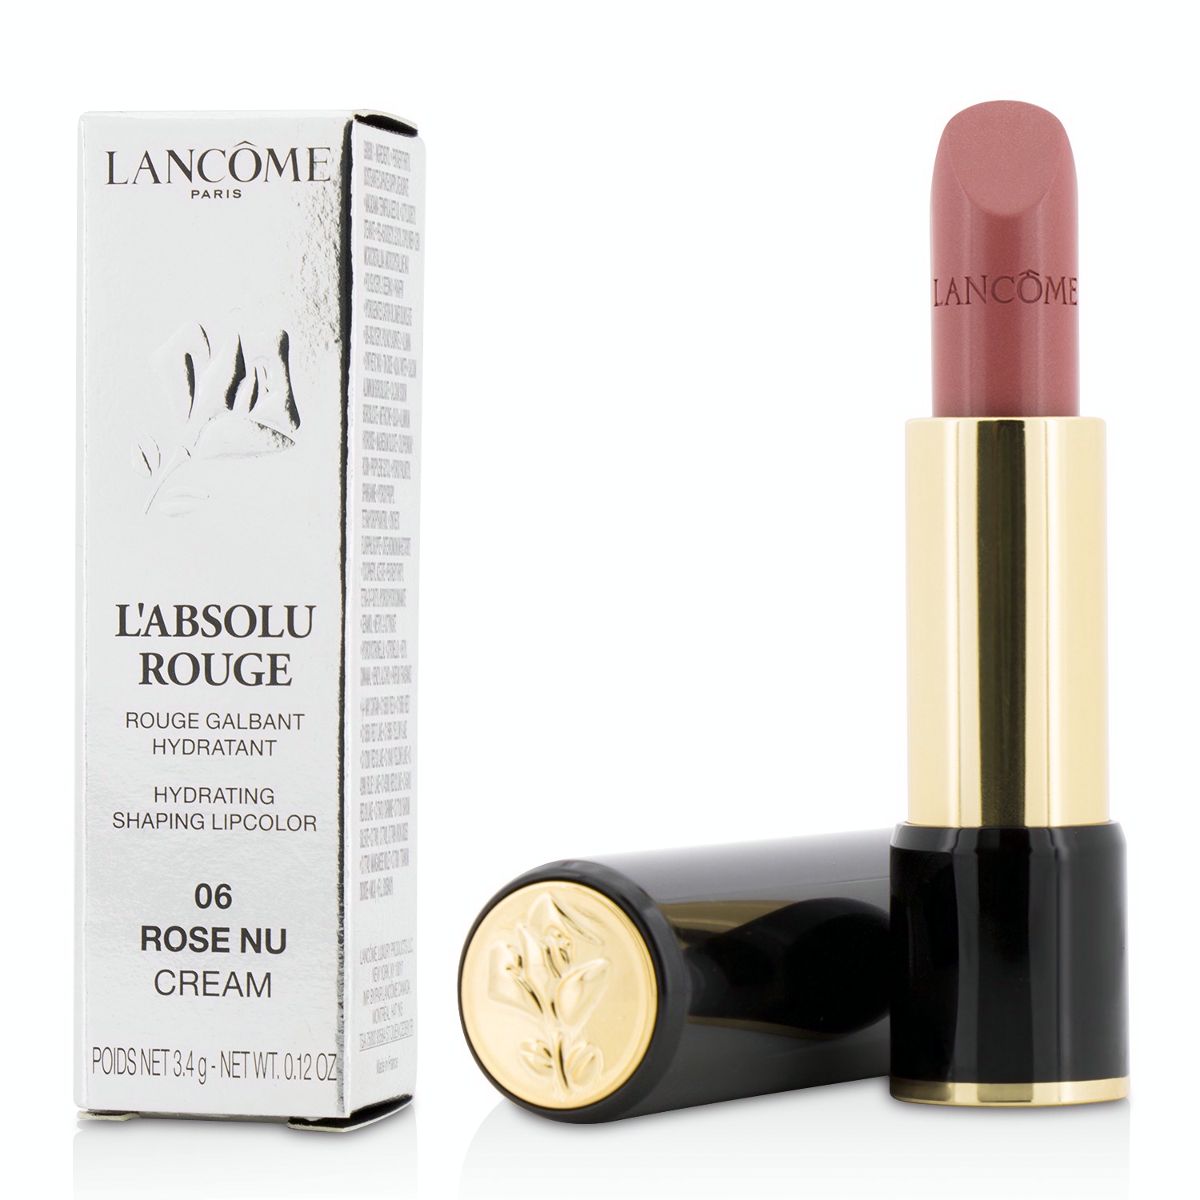 L Absolu Rouge Hydrating Shaping Lipcolor - # 06 Rose Nu (Cream) Lancome Image